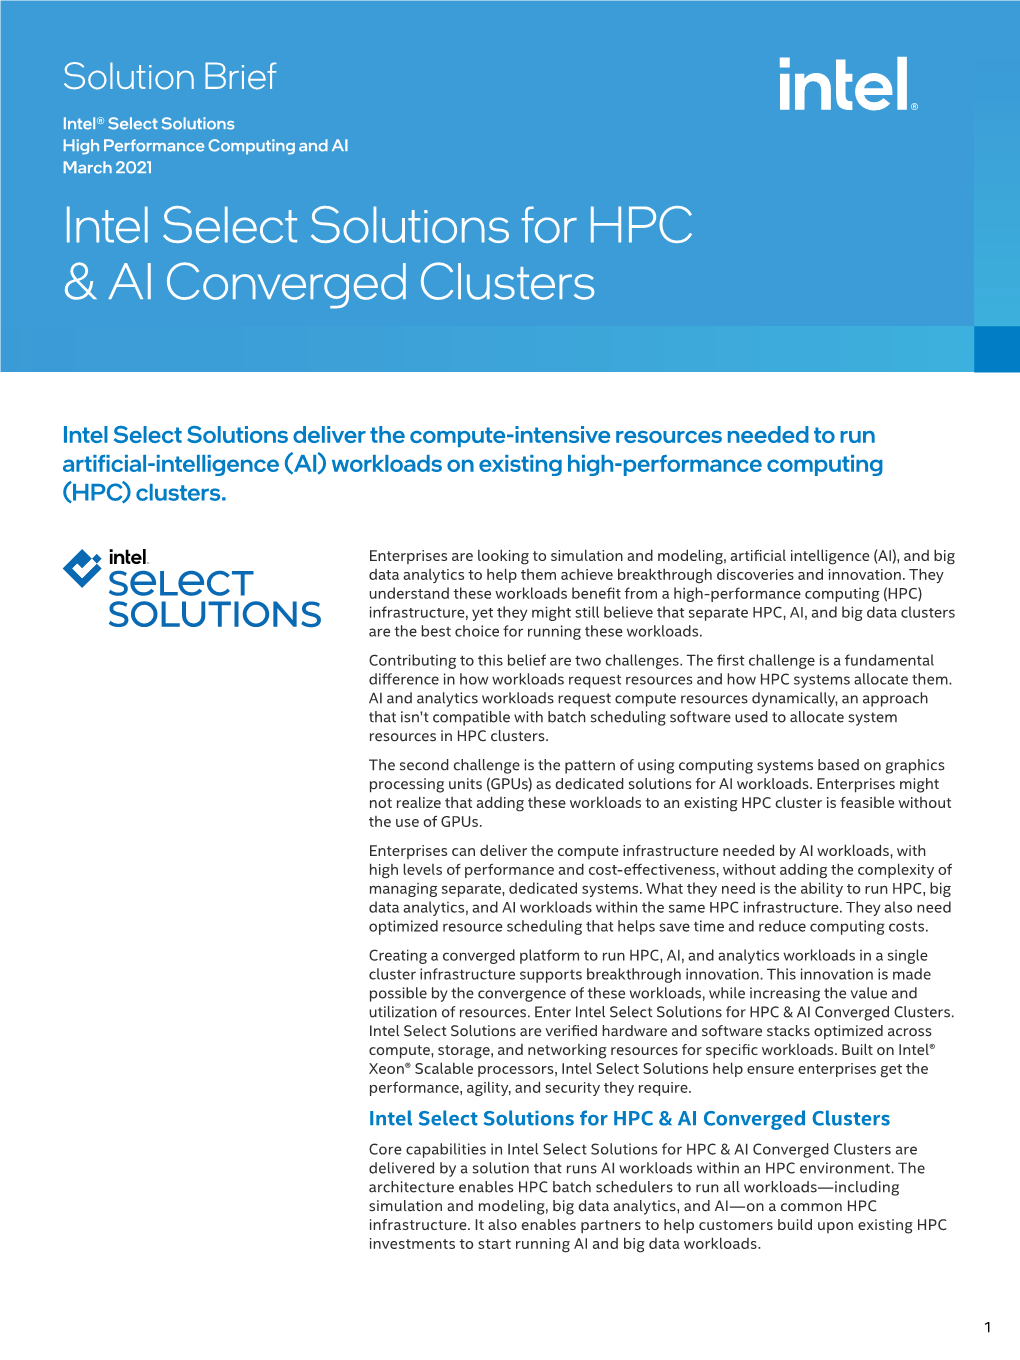 Intel Select Solutions for HPC & AI Converged Clusters